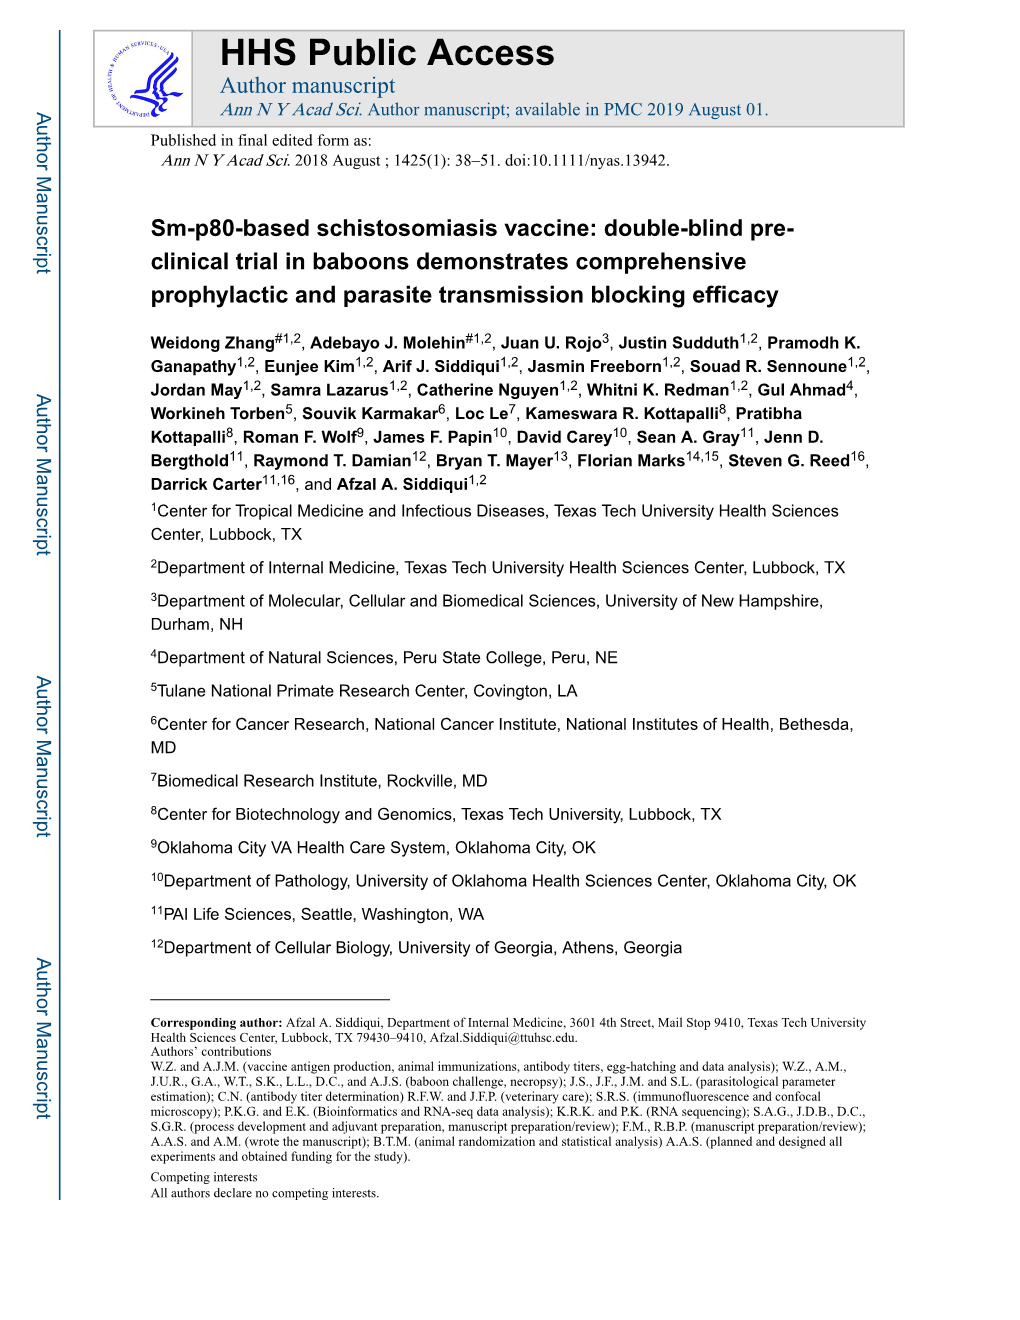 Sm-P80-Based Schistosomiasis Vaccine: Double-Blind Pre- Clinical Trial in Baboons Demonstrates Comprehensive Prophylactic and Parasite Transmission Blocking Efficacy